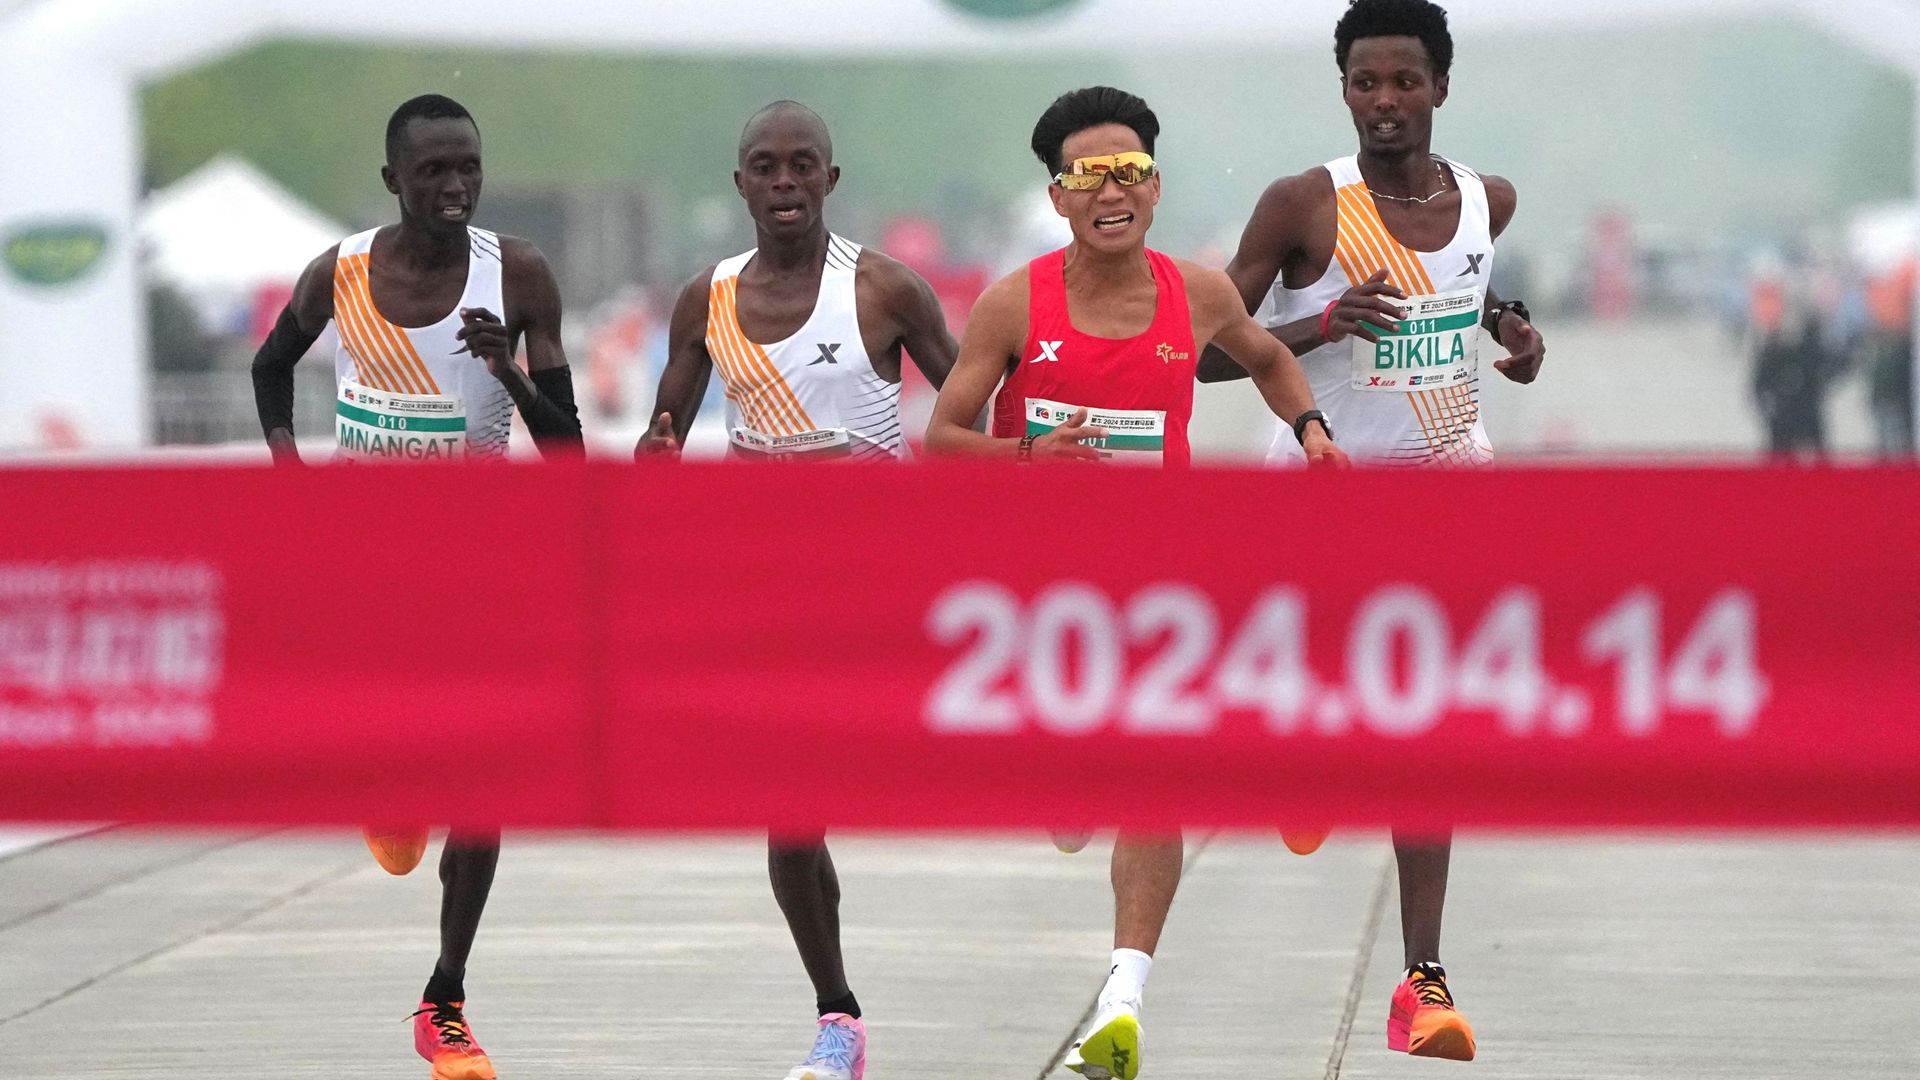 Beijing half marathon champion stripped of medal after runners slowed down for him